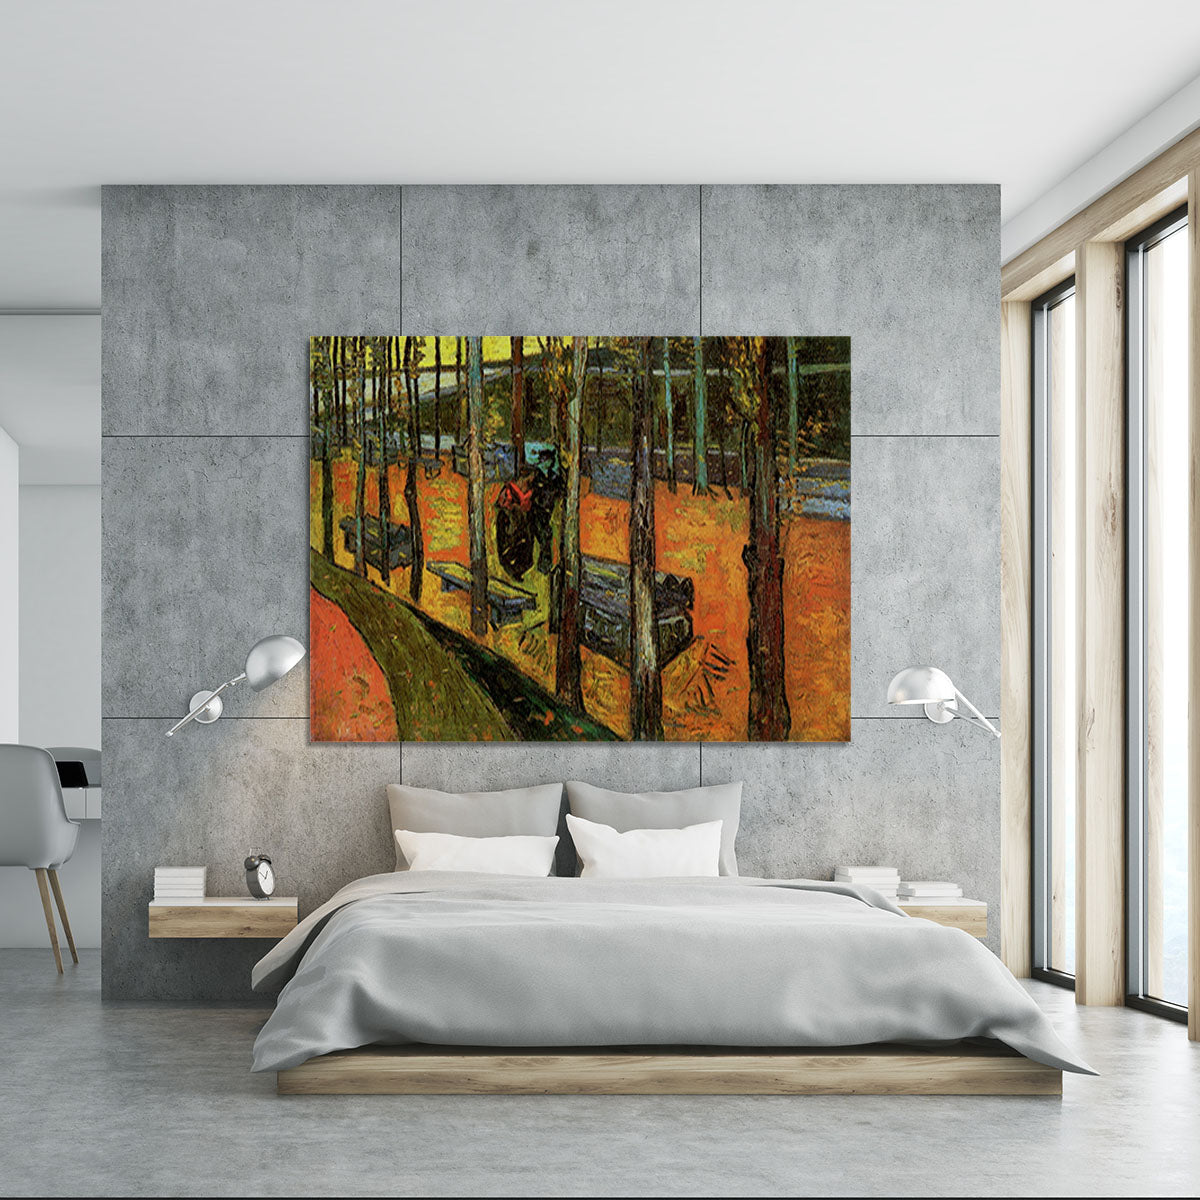 Les Alyscamps 2 by Van Gogh Canvas Print or Poster - Canvas Art Rocks - 5